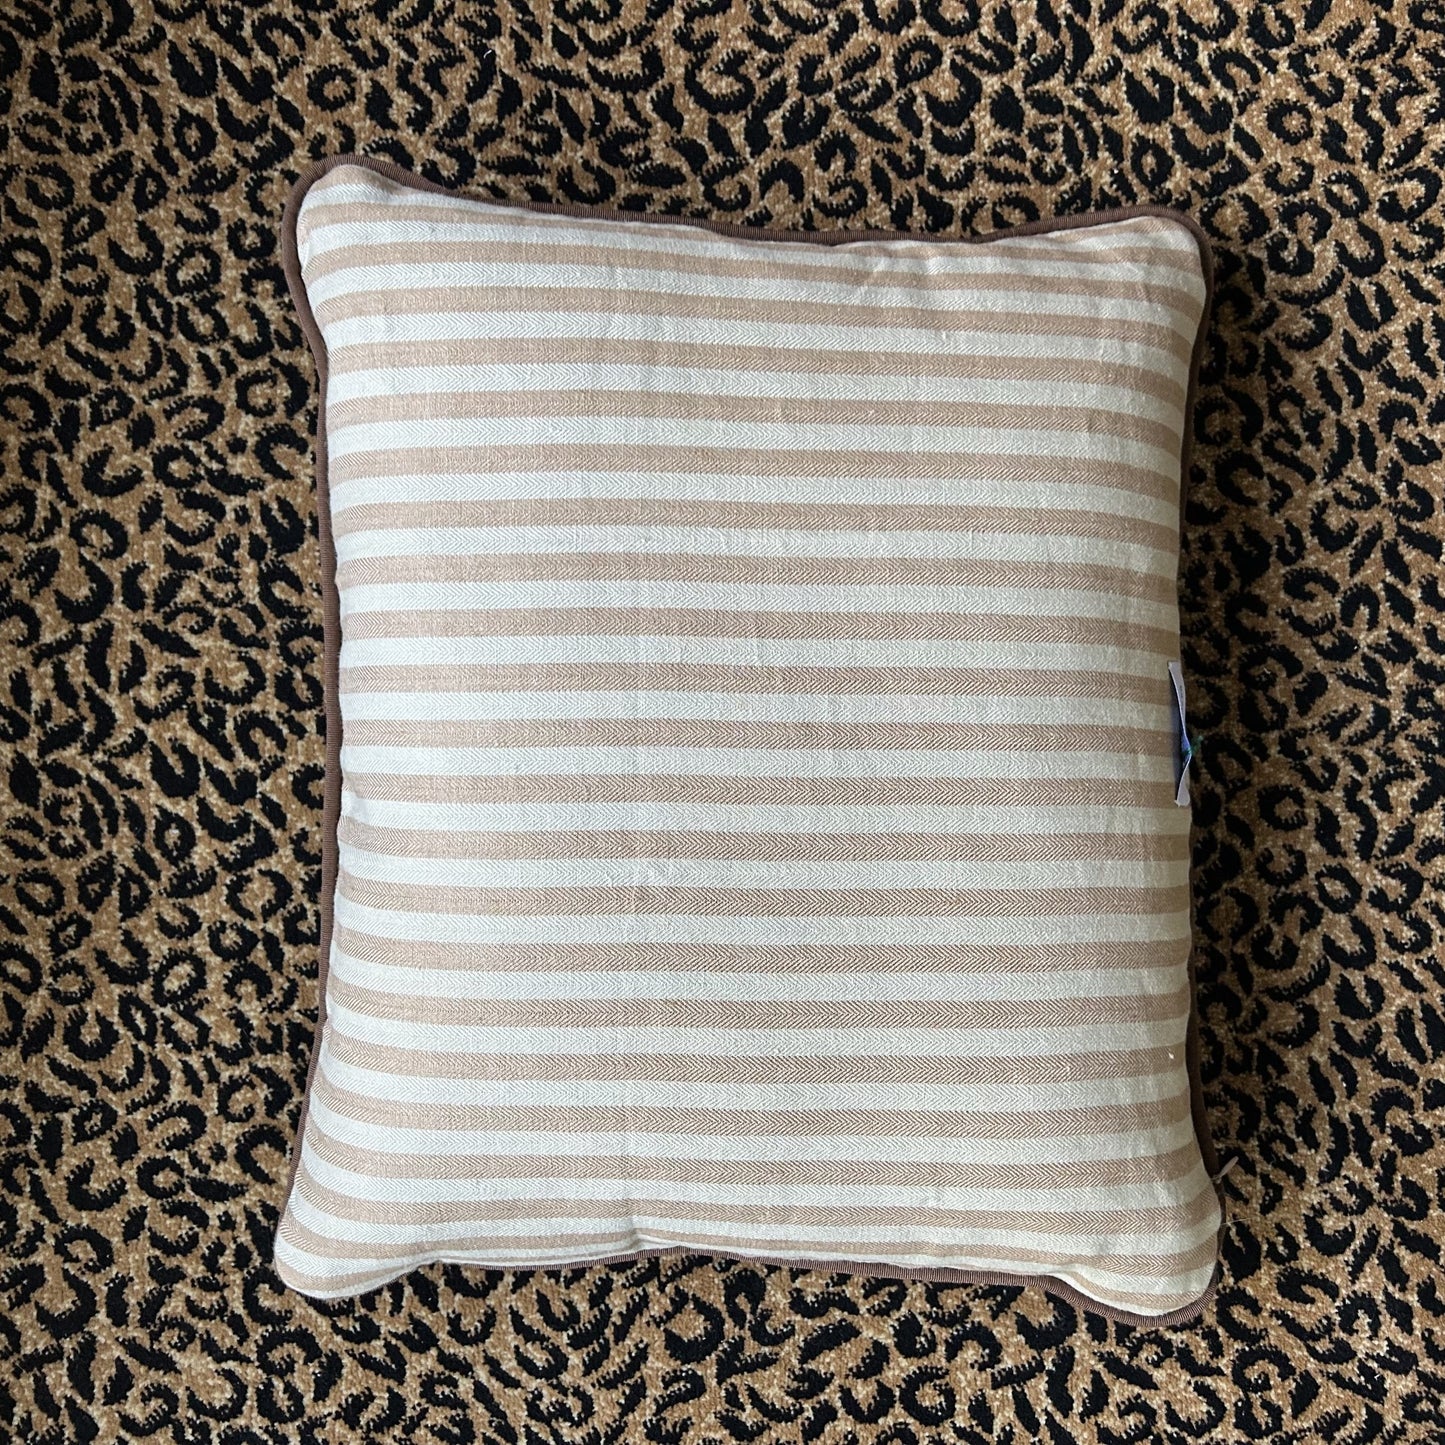 Cottage Rose with Stripe 16 x 20 Designer Pillow with Down Feather Insert